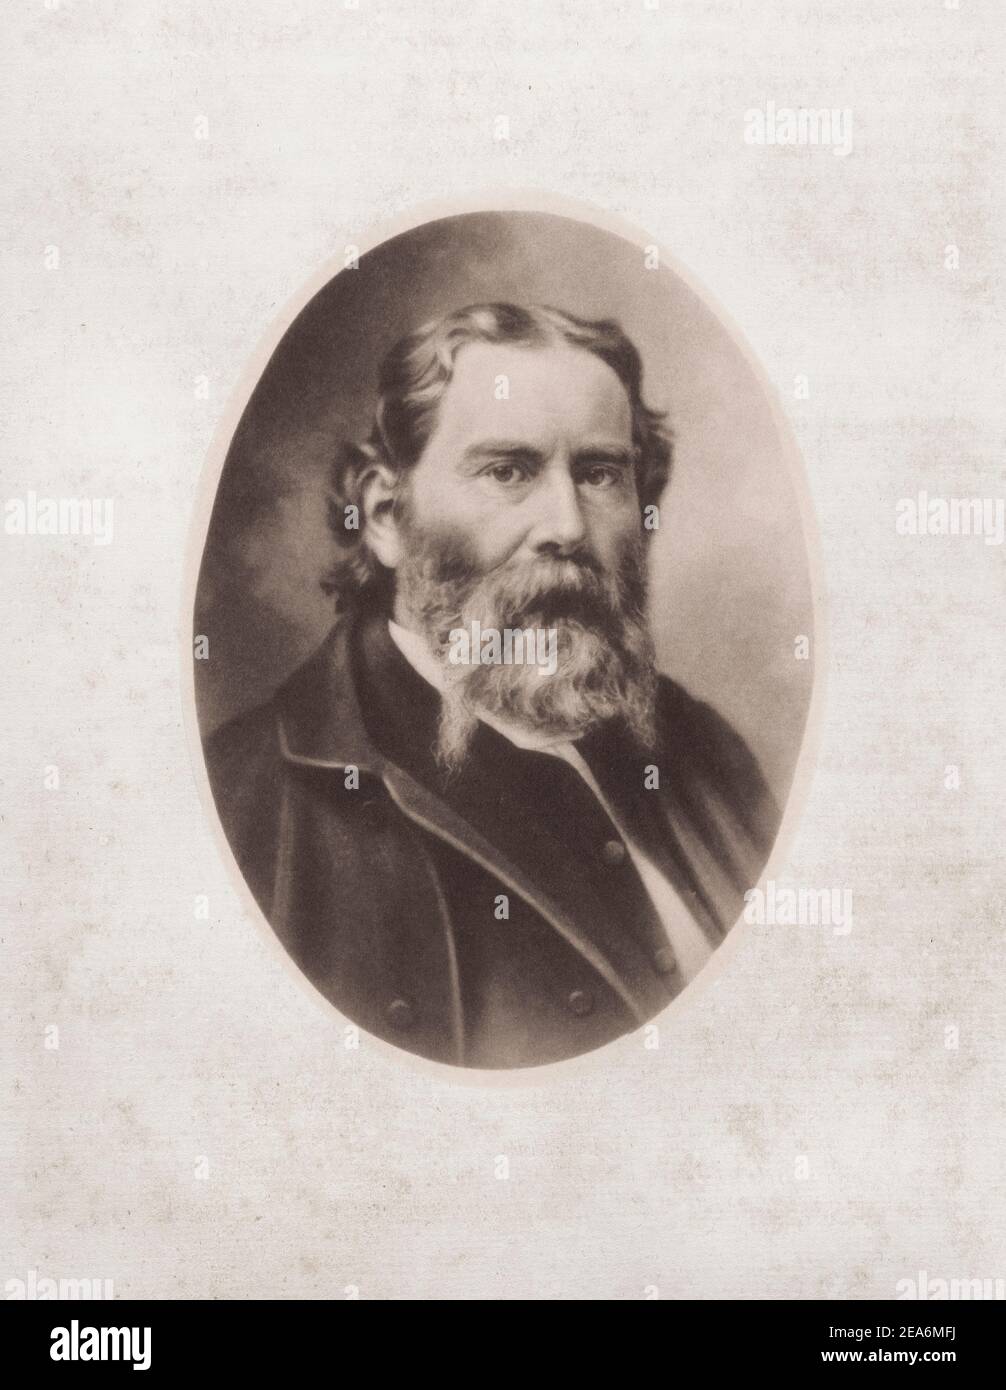 James Russell Lowell (1819 – 1891) was an American Romantic poet, critic, editor, and diplomat. He is associated with the Fireside Poets, a group of N Stock Photo